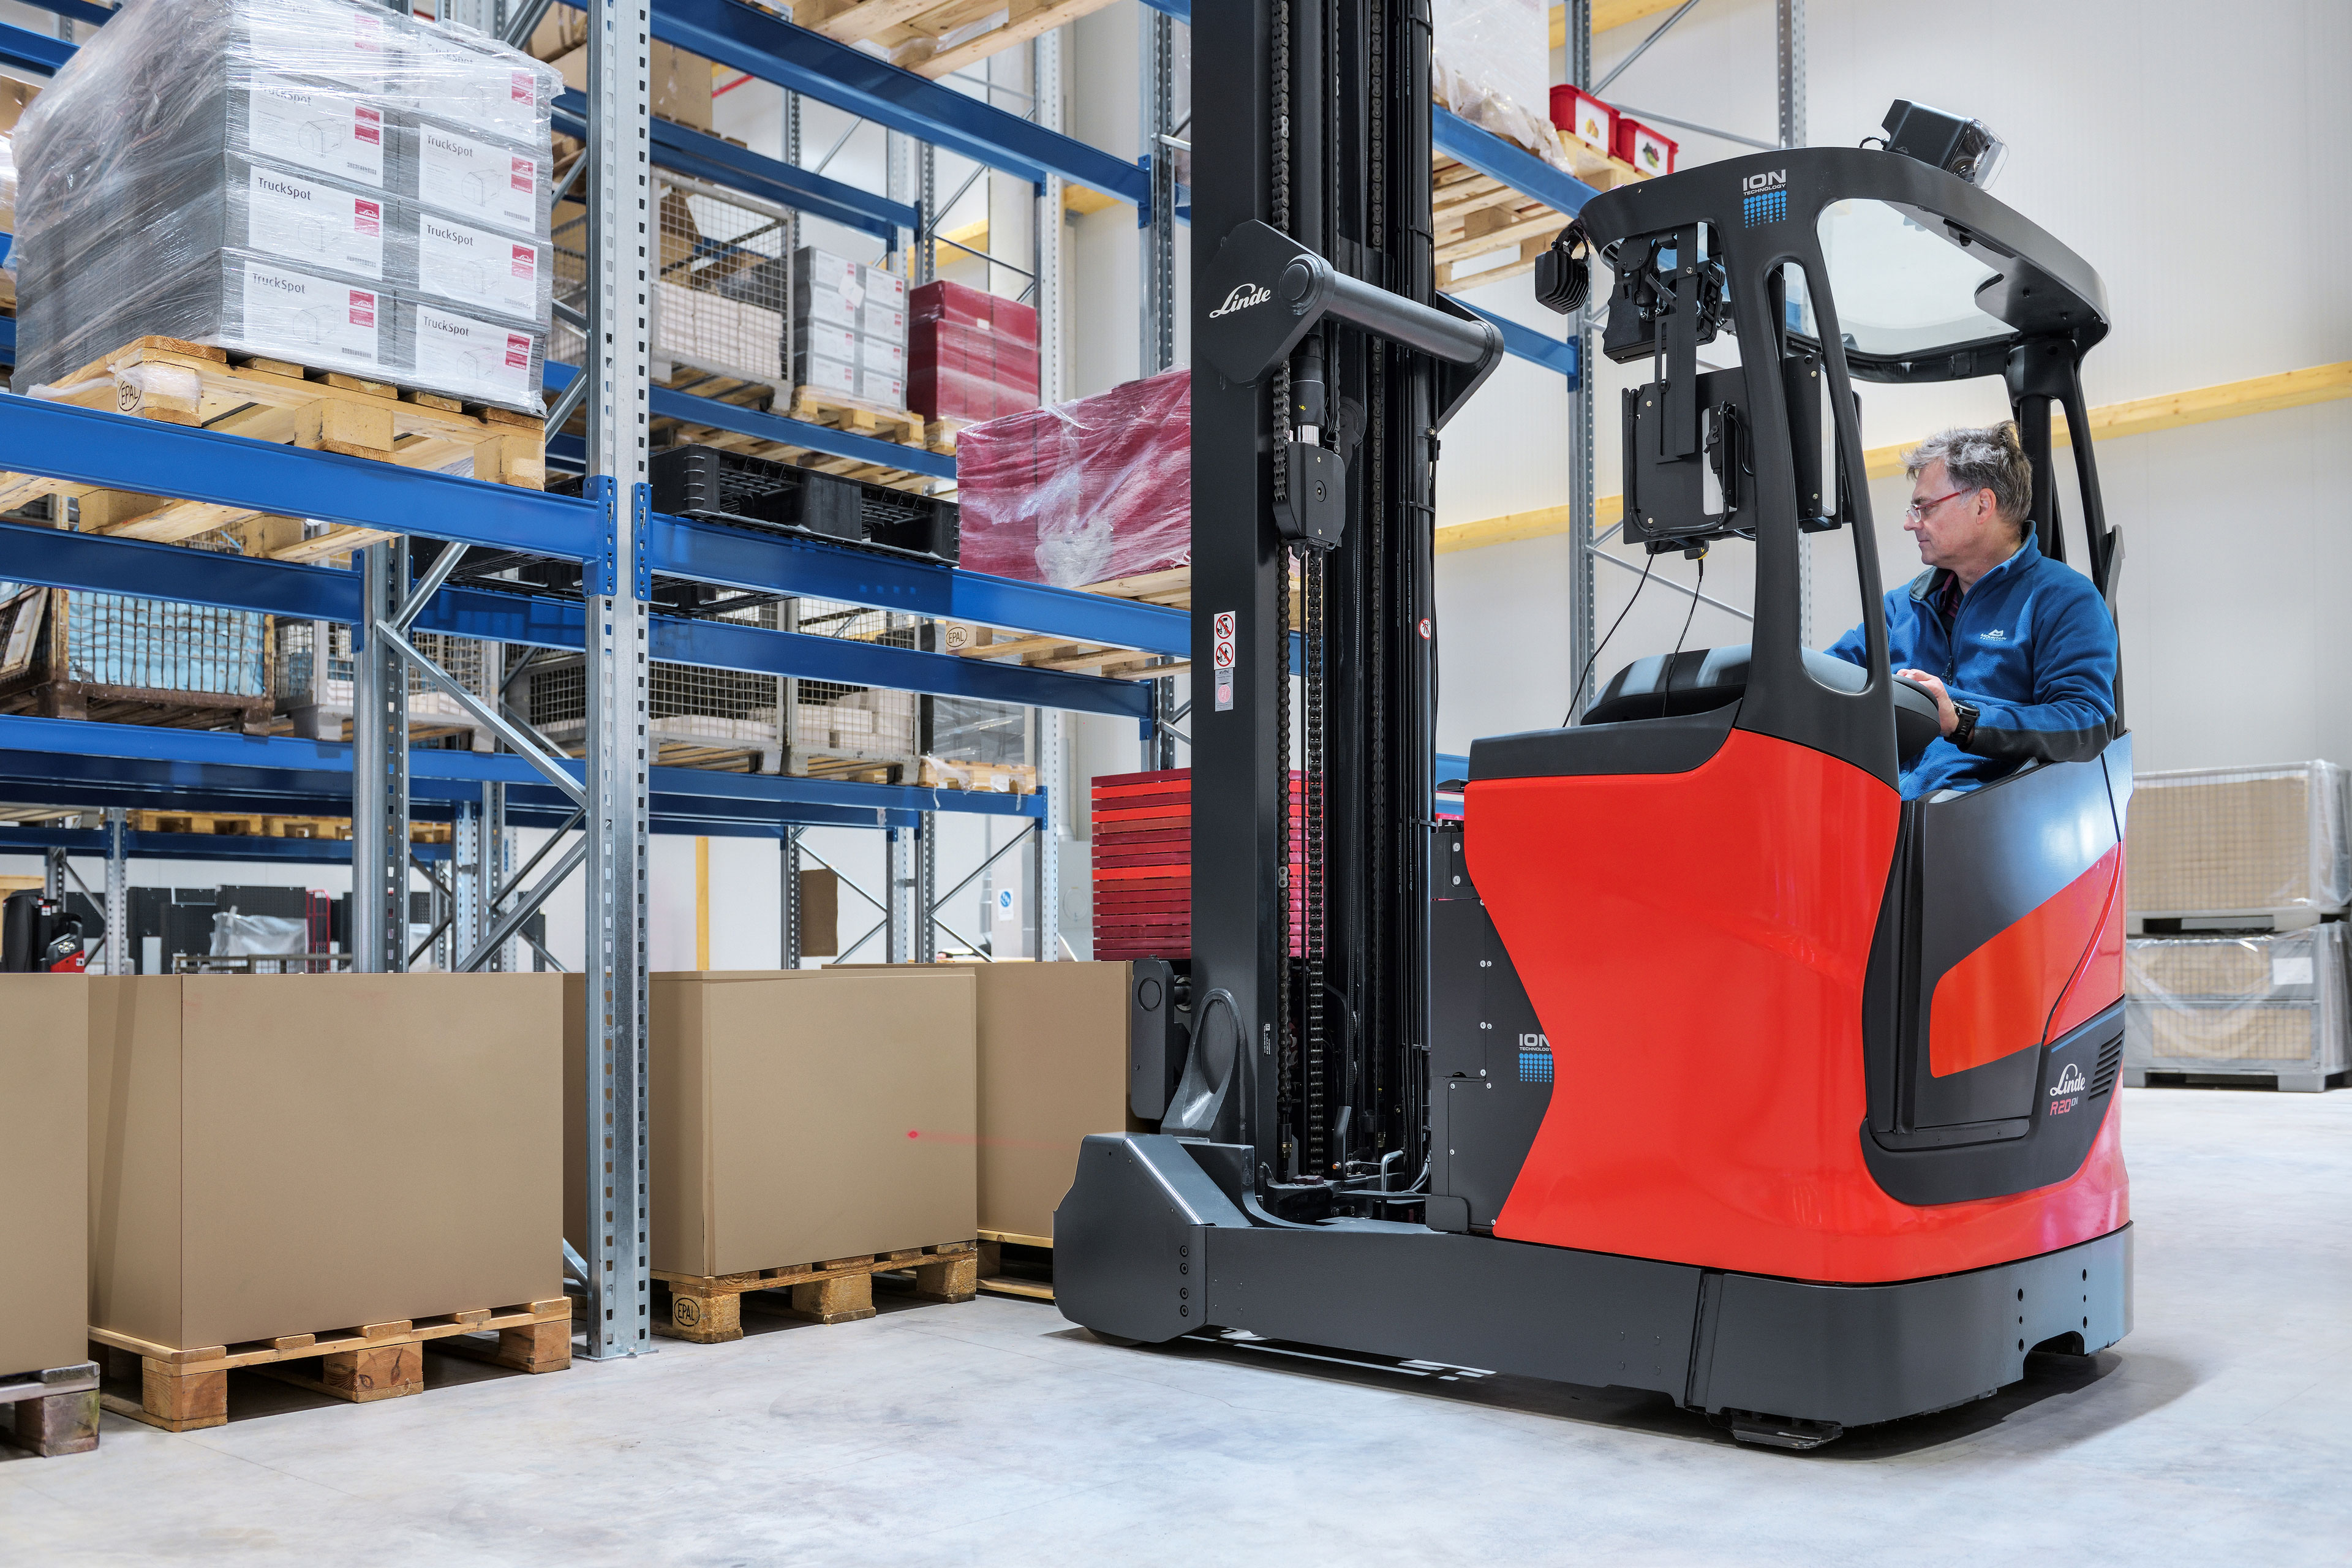 The Rack Protection Sensor (RPS) for reach trucks from Linde Material Handling detects objects that come into focus in the light beam in front of them. If an obstacle is identified, the assistance system dynamically brakes the truck, thus avoiding damage.